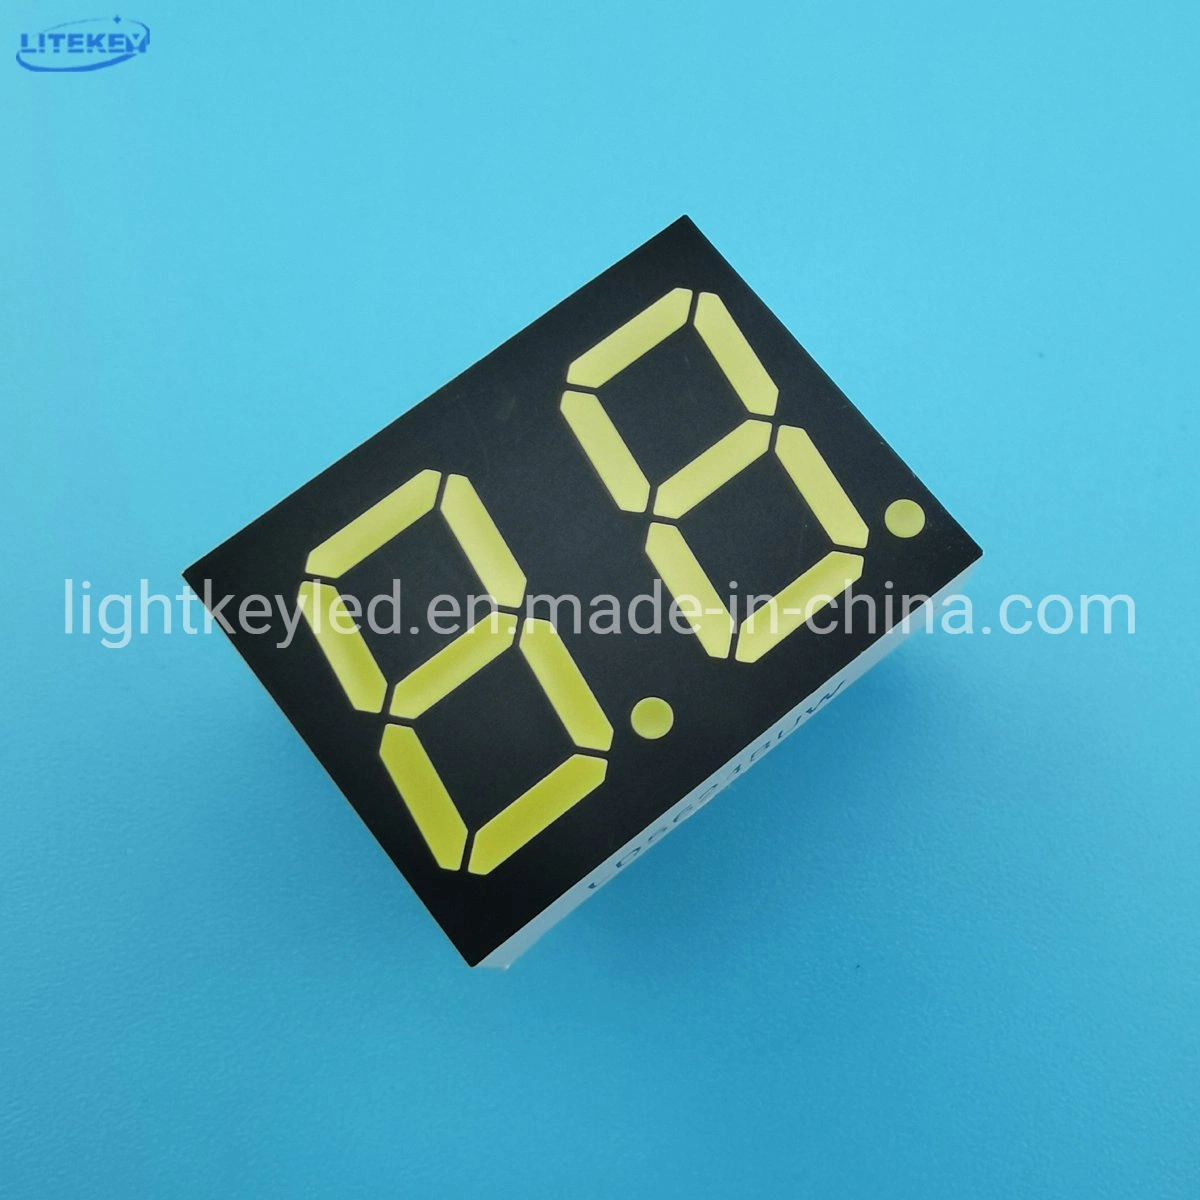 0.5 Inch Dual Digits 7 Segment LED Display with RoHS From Expert Manufacturer